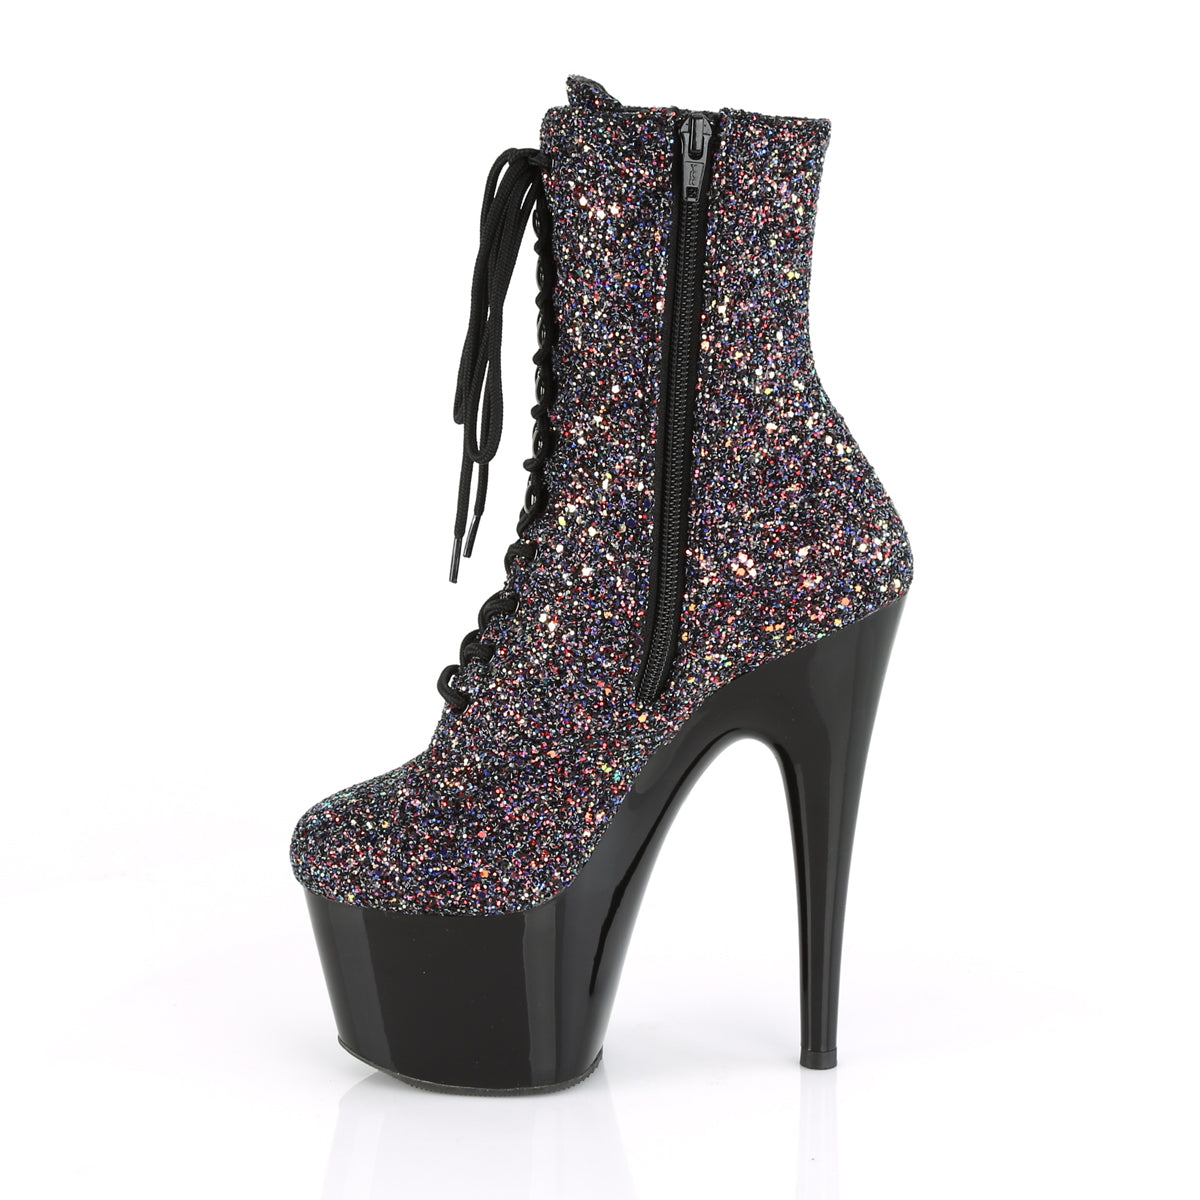 ADORE-1020LG 7" Heel Purple Multi Glitter Sexy Ankle Boots-Pleaser- Sexy Shoes Pole Dance Heels